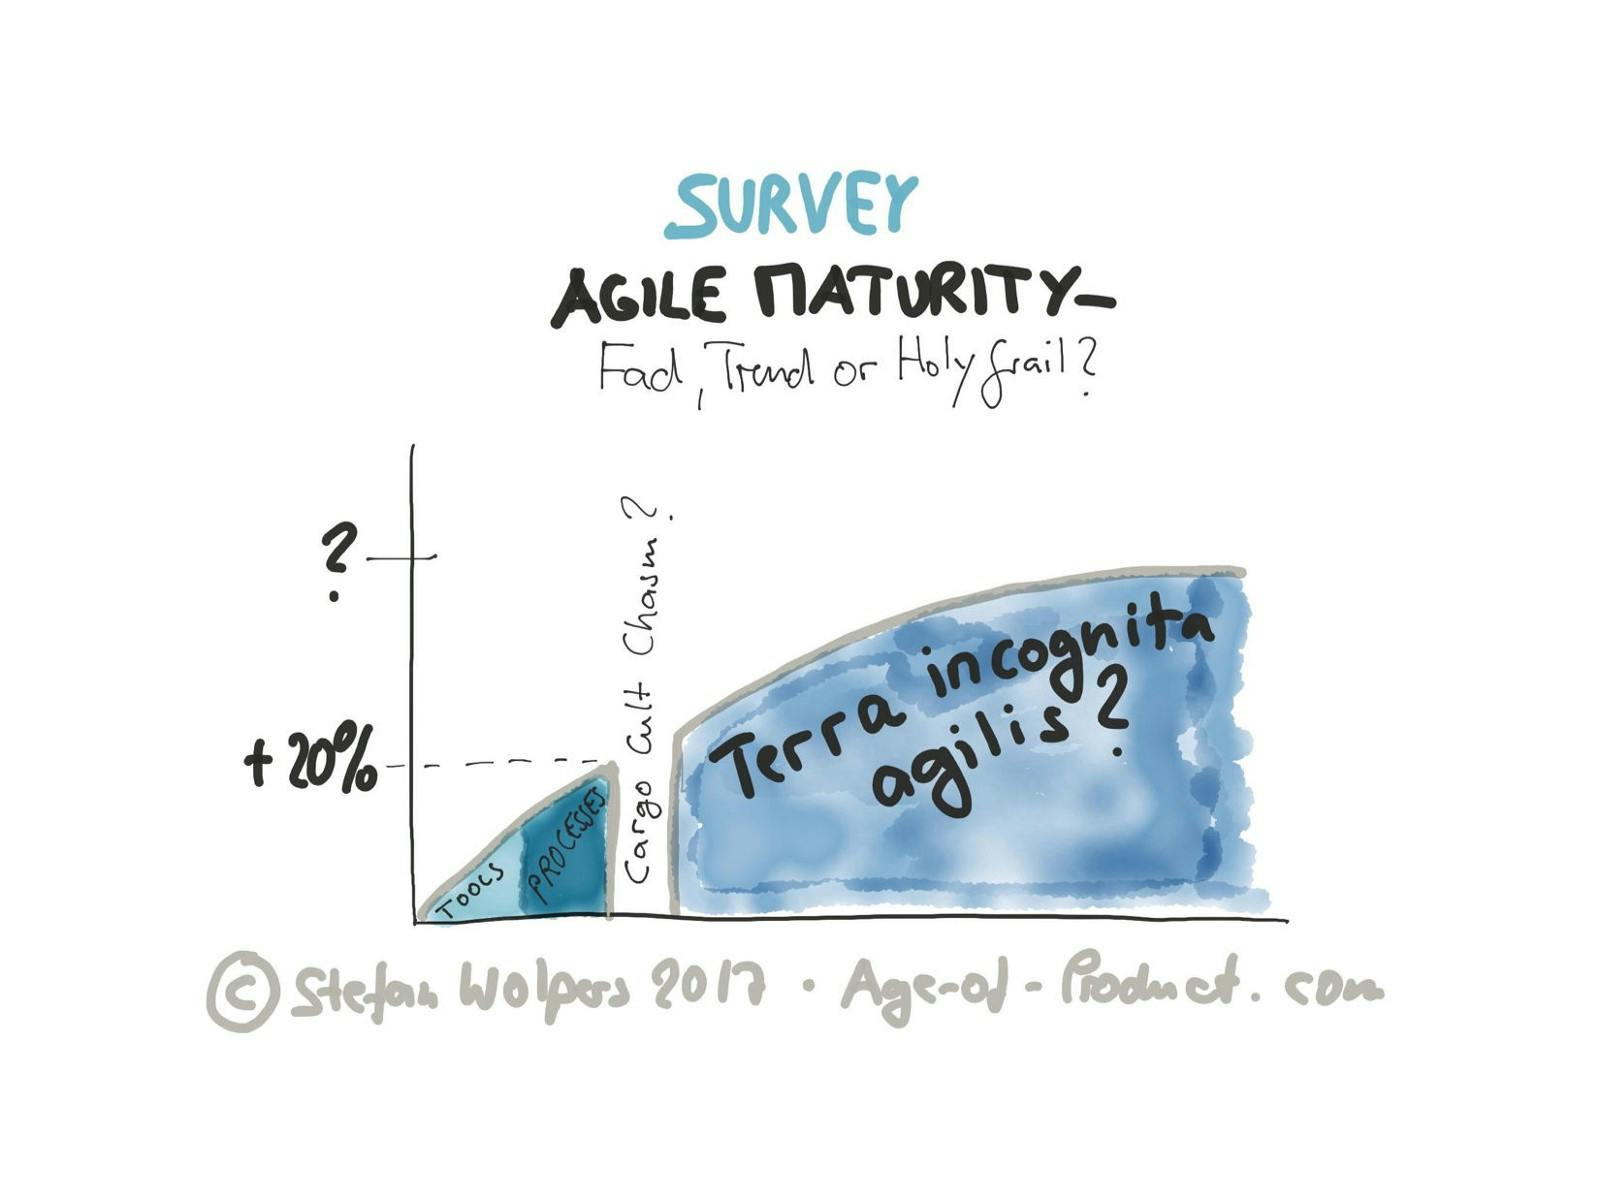 featured image - Agile Maturity: Fad, Trend or Holy Grail? #Survey